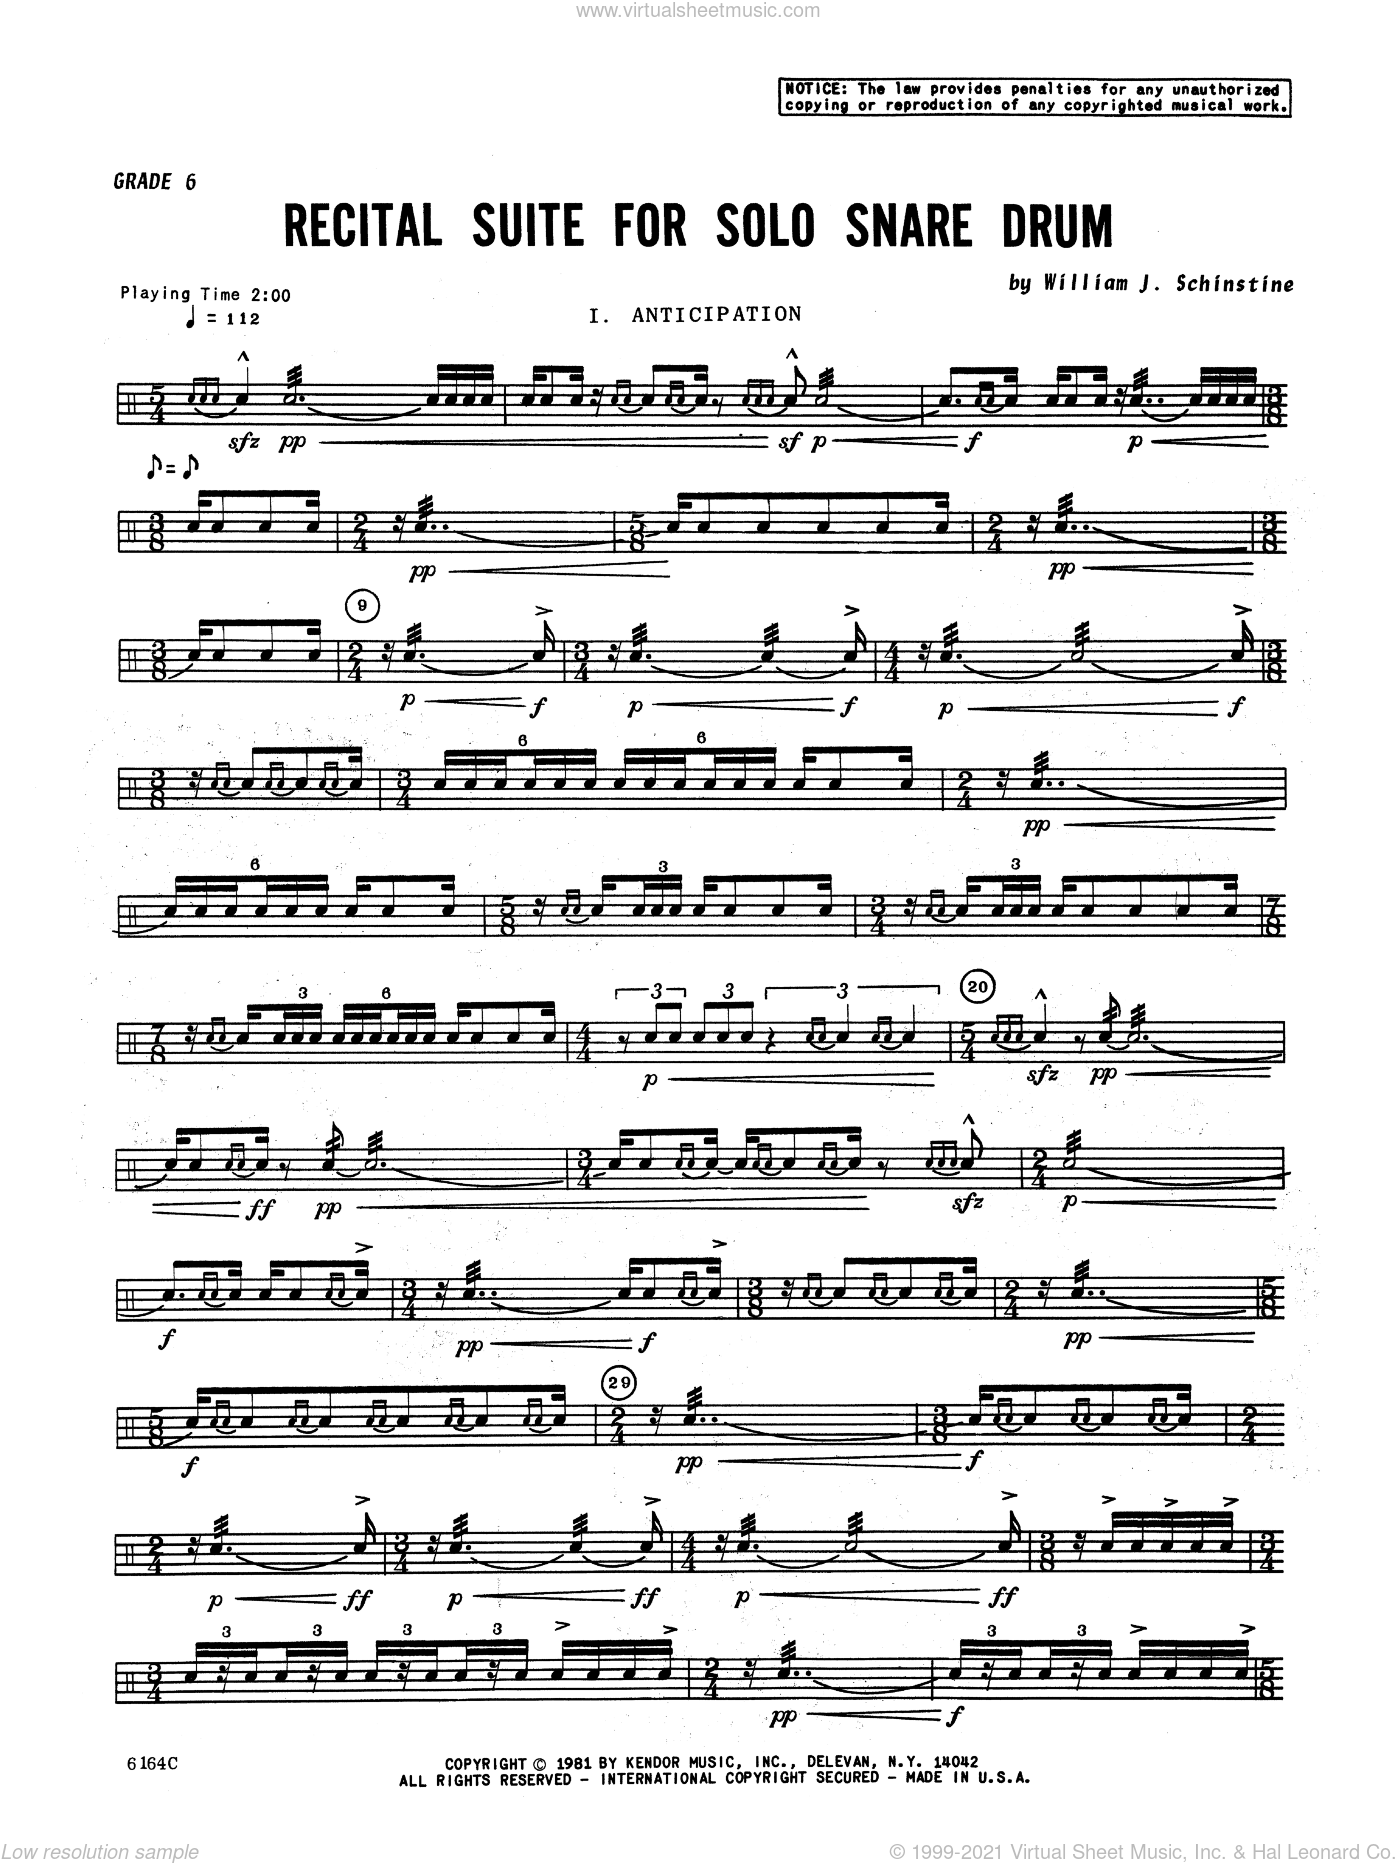 Schinstine - Recital Suite For Solo Snare Drum sheet music for percussions